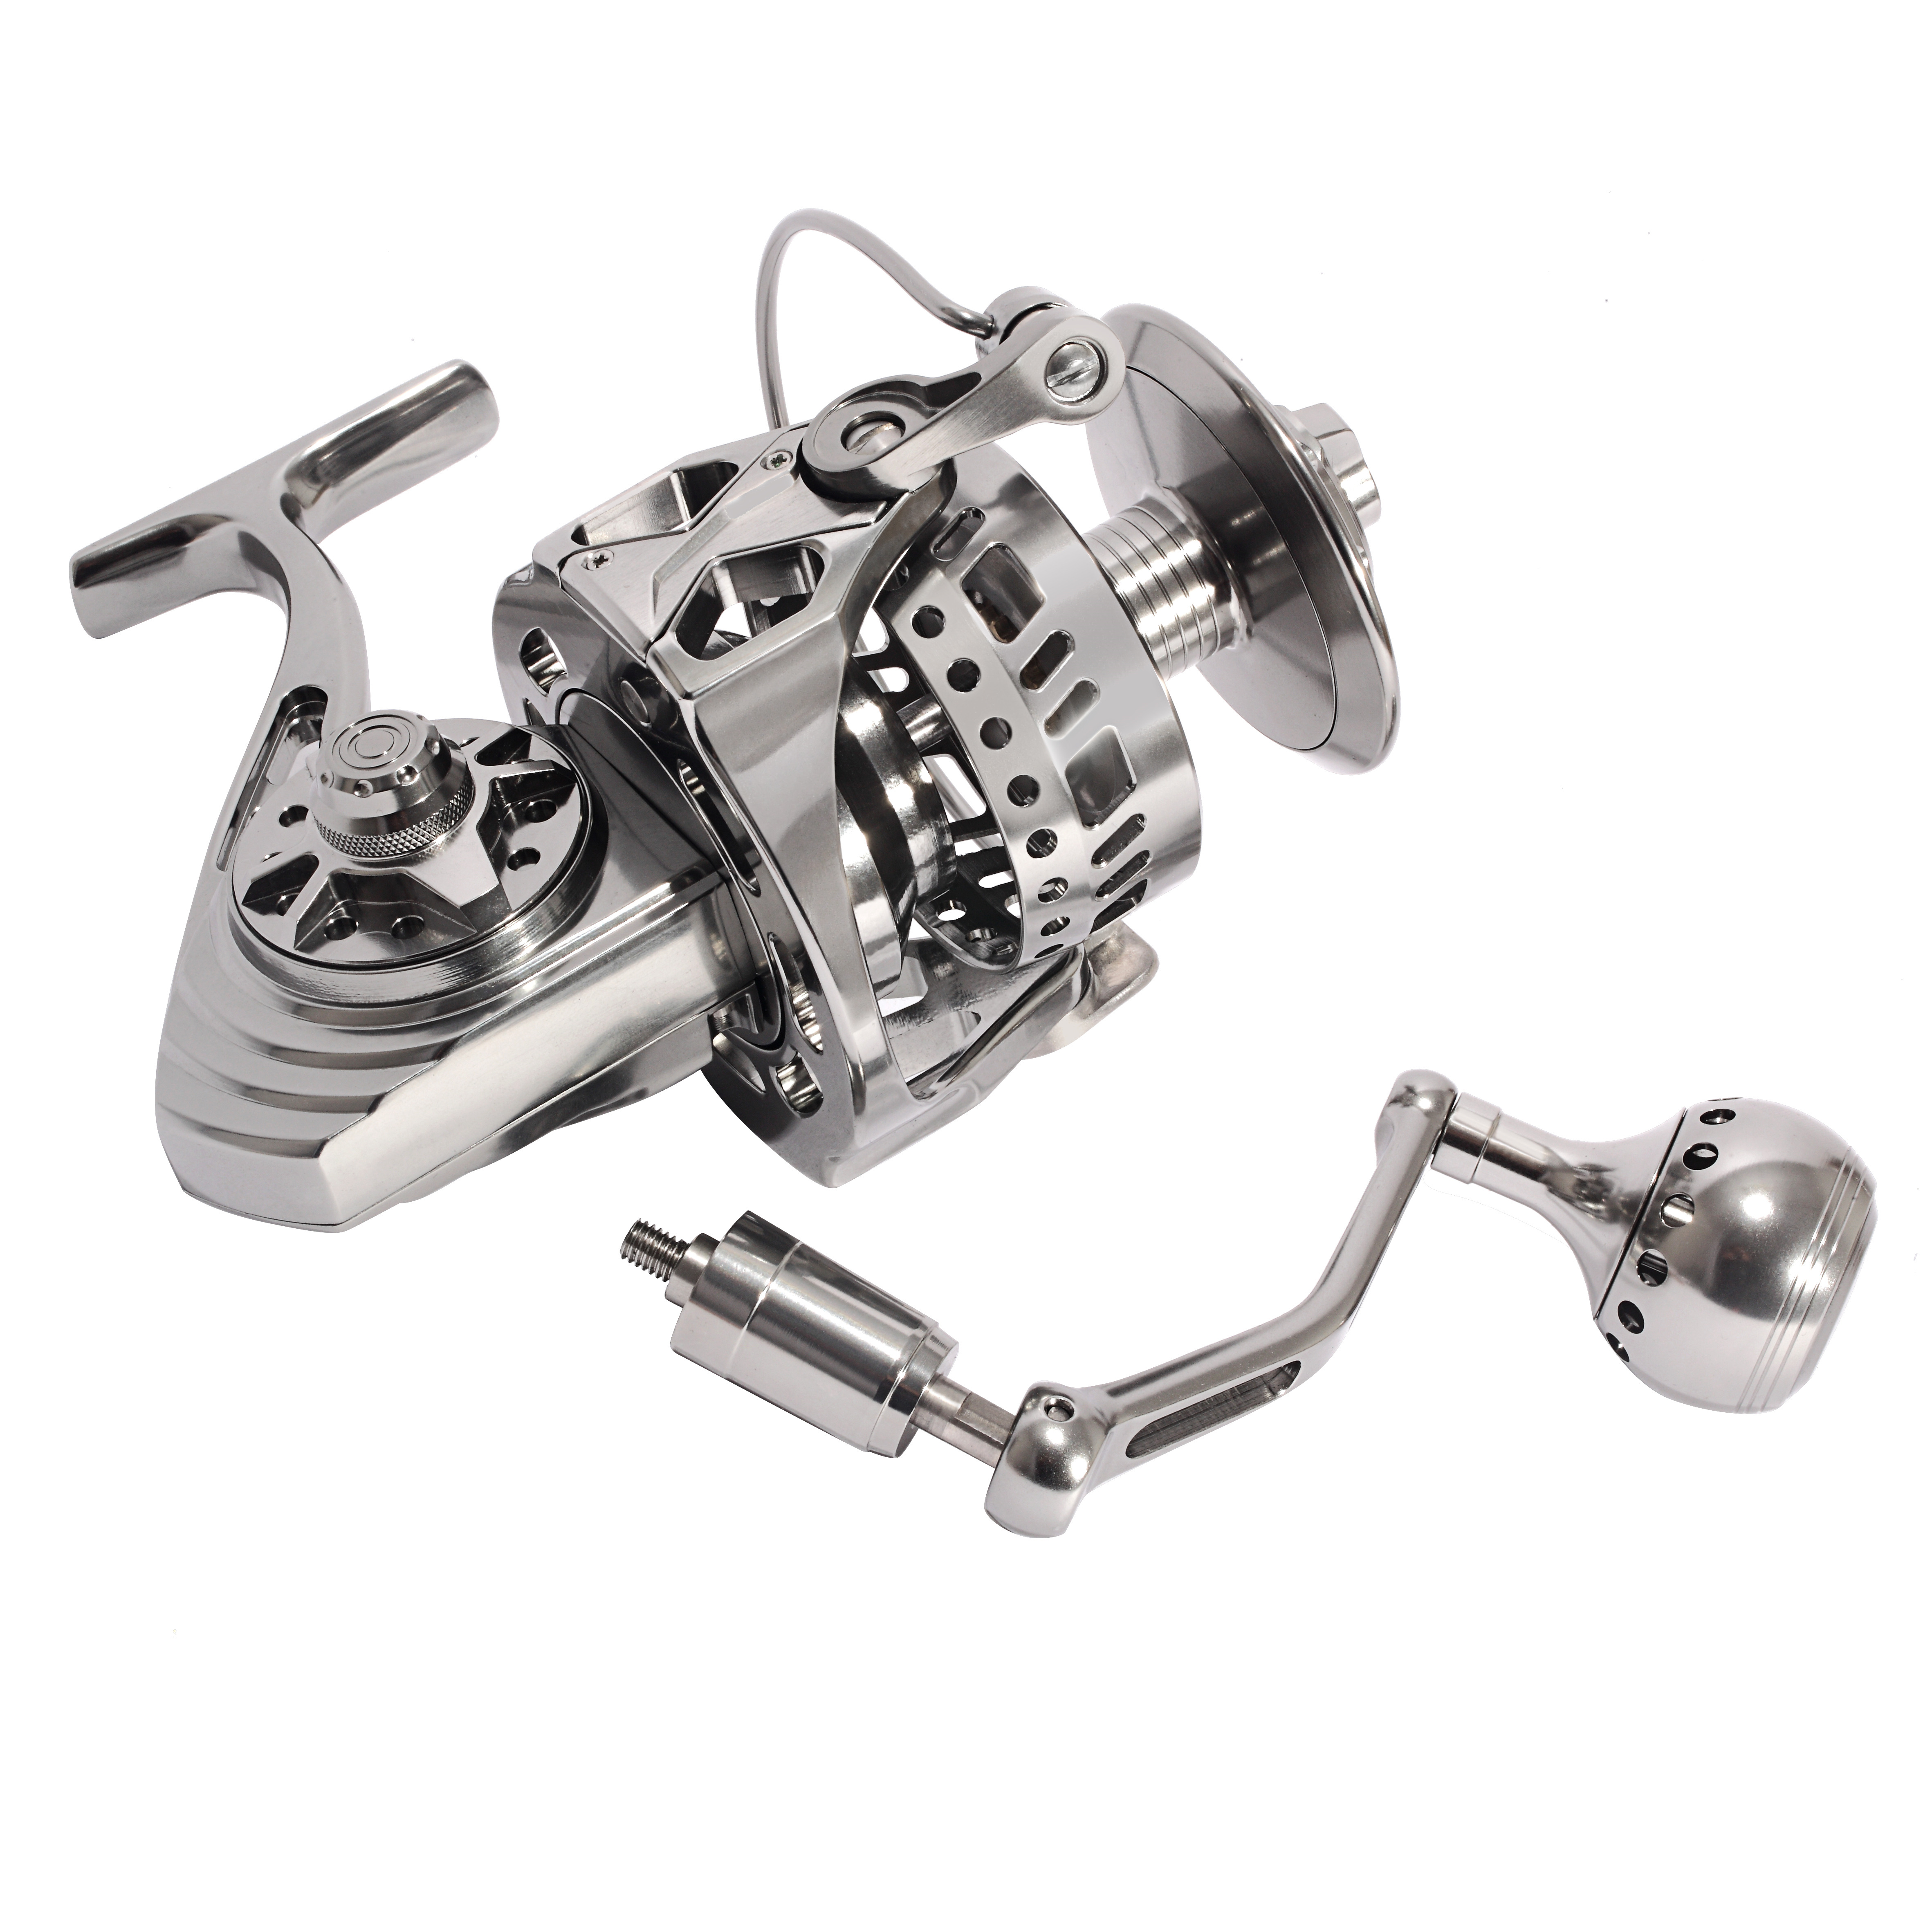 ZJIANC Spinning Reel Powerful and Durable Reel Super Smooth Fishing Reel  Light Weight-Full Metal Body Freshwater and Saltwater Spinning Reels  Spinning Fishing Reel 3000Spinning Reel : : Sporting Goods